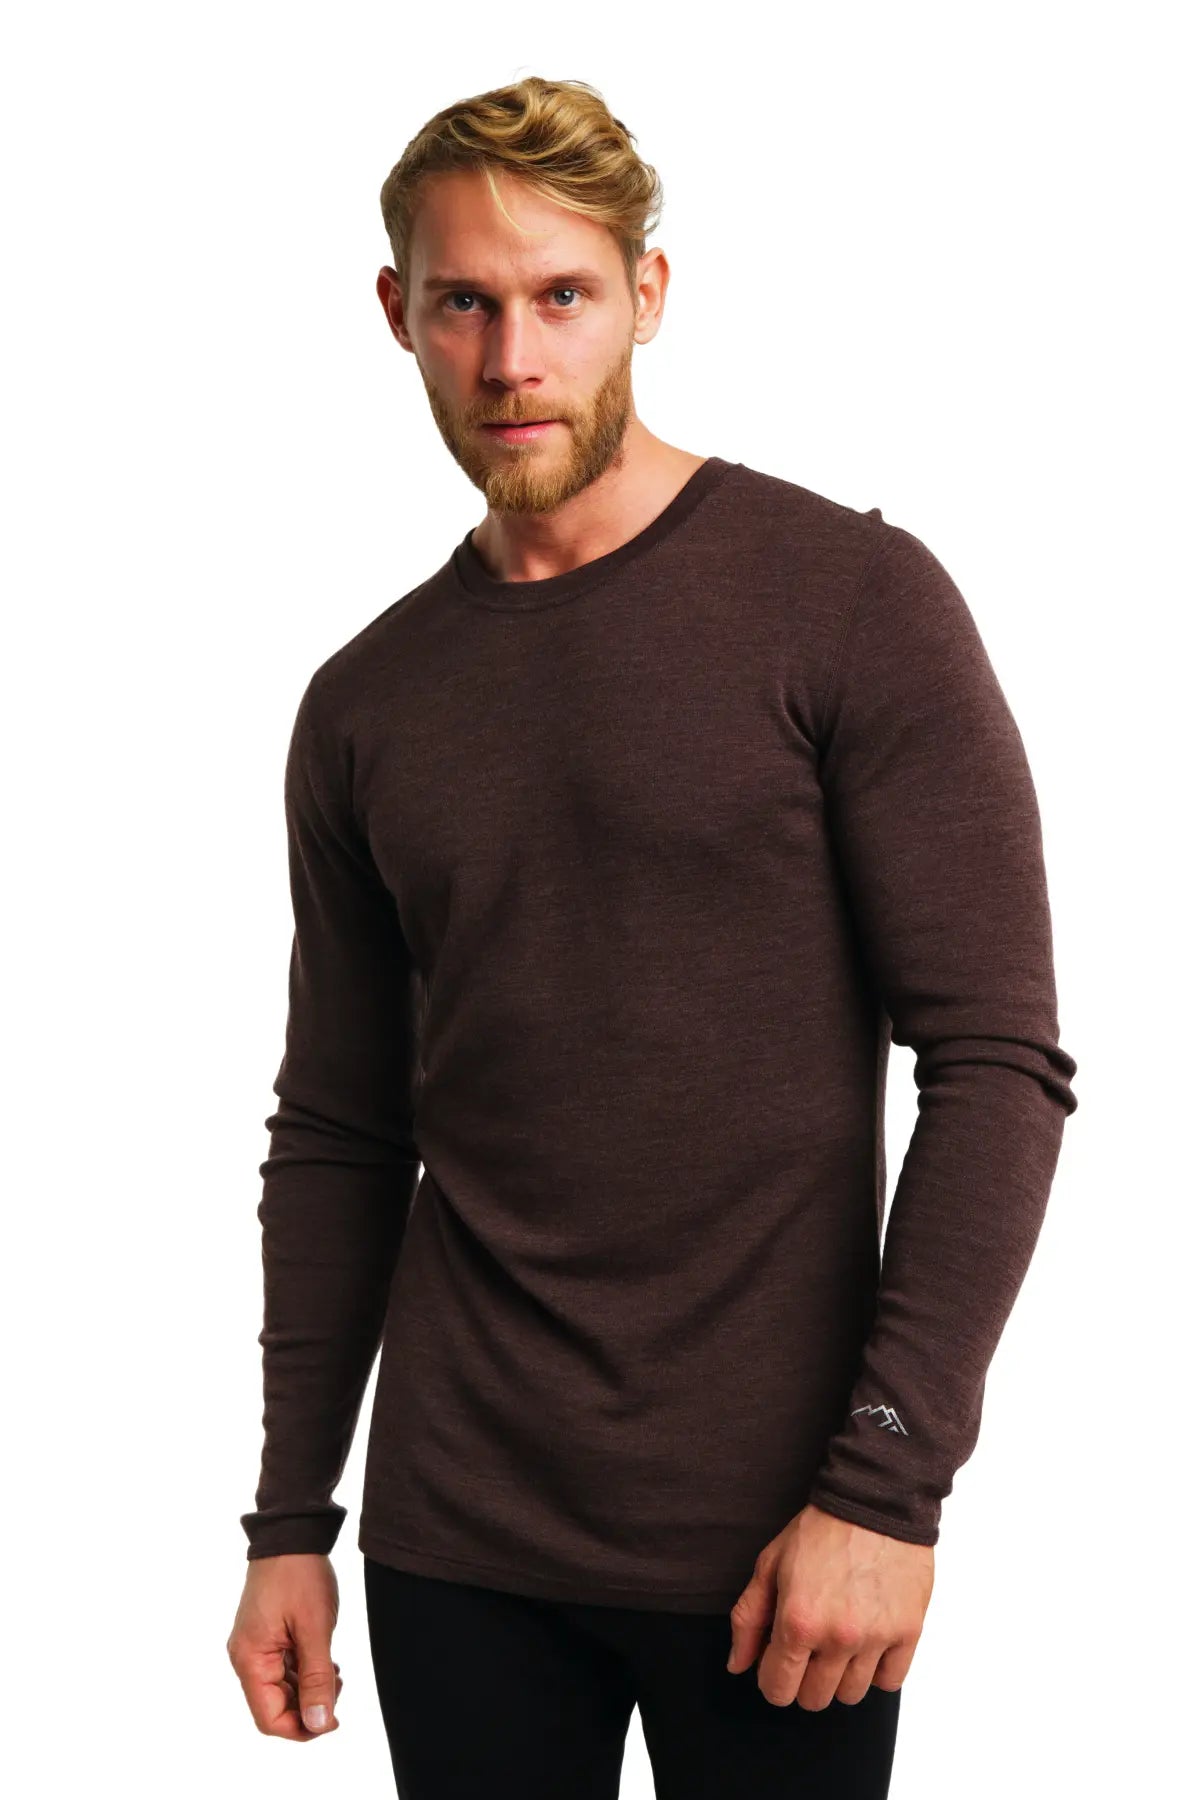 Mens Thermal Underwear Men Merino Wool 250G Base Layer Crew Shirt 100% Merino  Wool Thermal Underwear Top Long Sleeve Baselayer Breathable USA Size 231220  From Diao03, $36.66